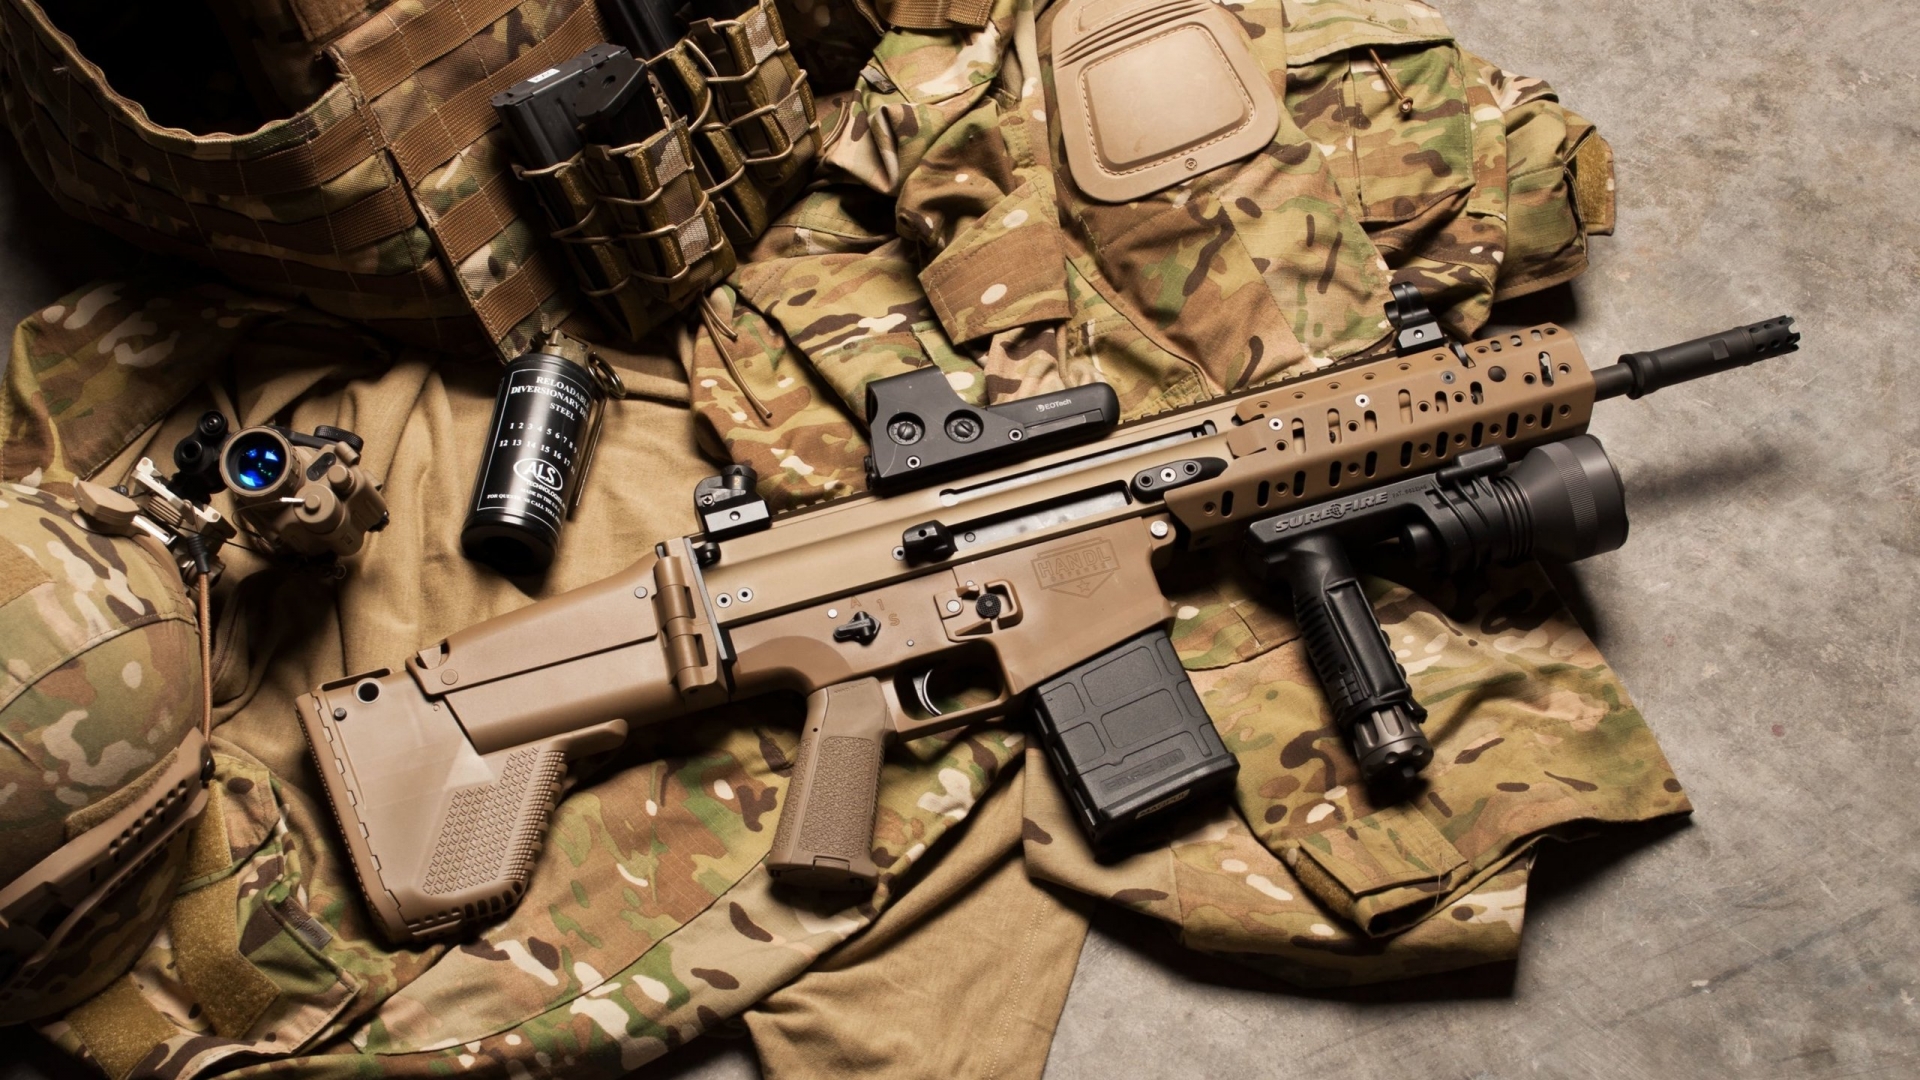 FN Scar Assault Rifle for 1920 x 1080 HDTV 1080p resolution